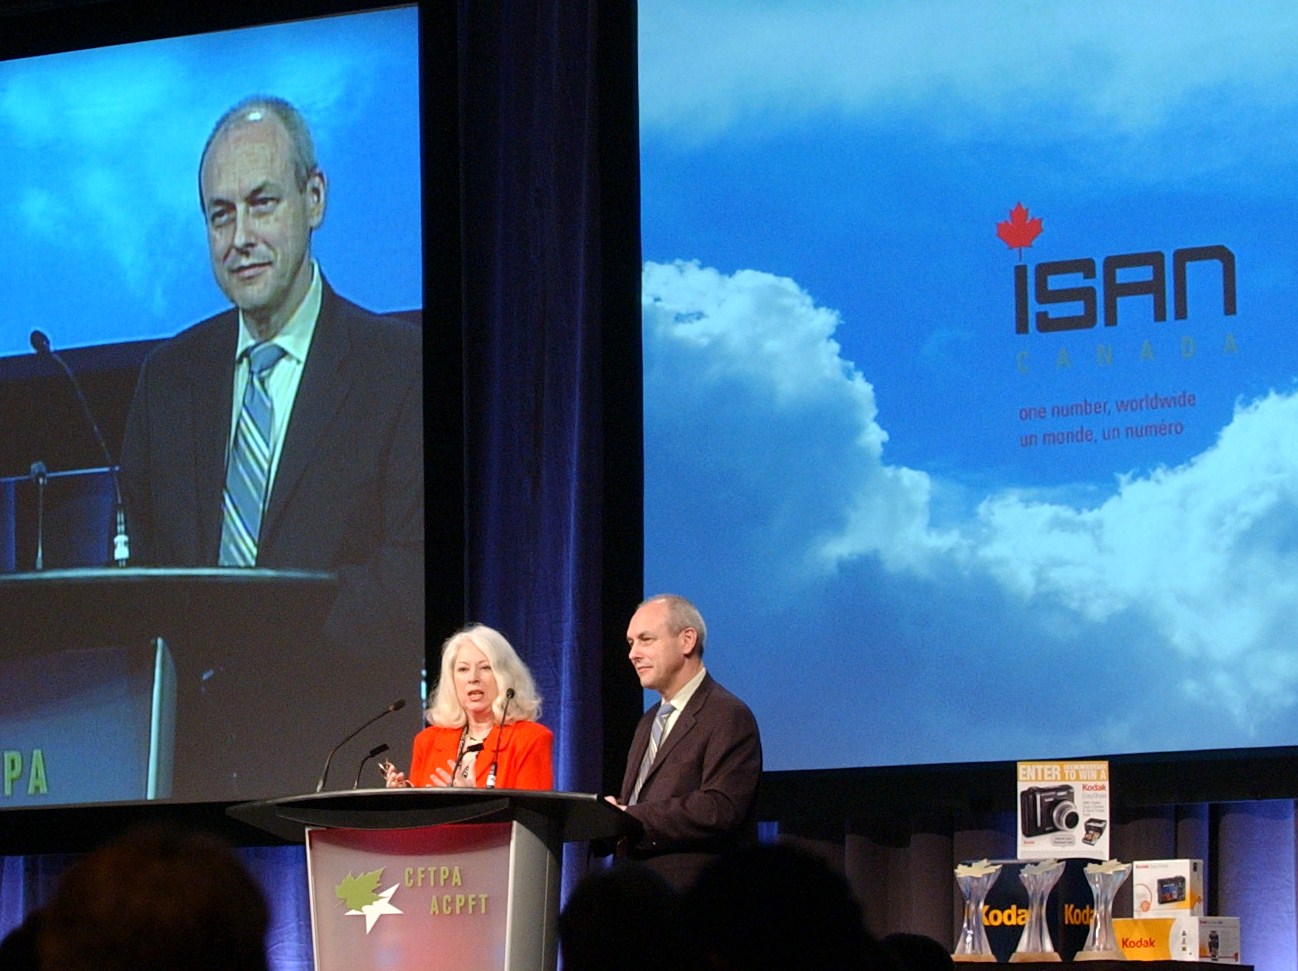 Prime Time in Ottawa, 2008, Launch of ISAN Canada with fellow director Sandra Macdonald